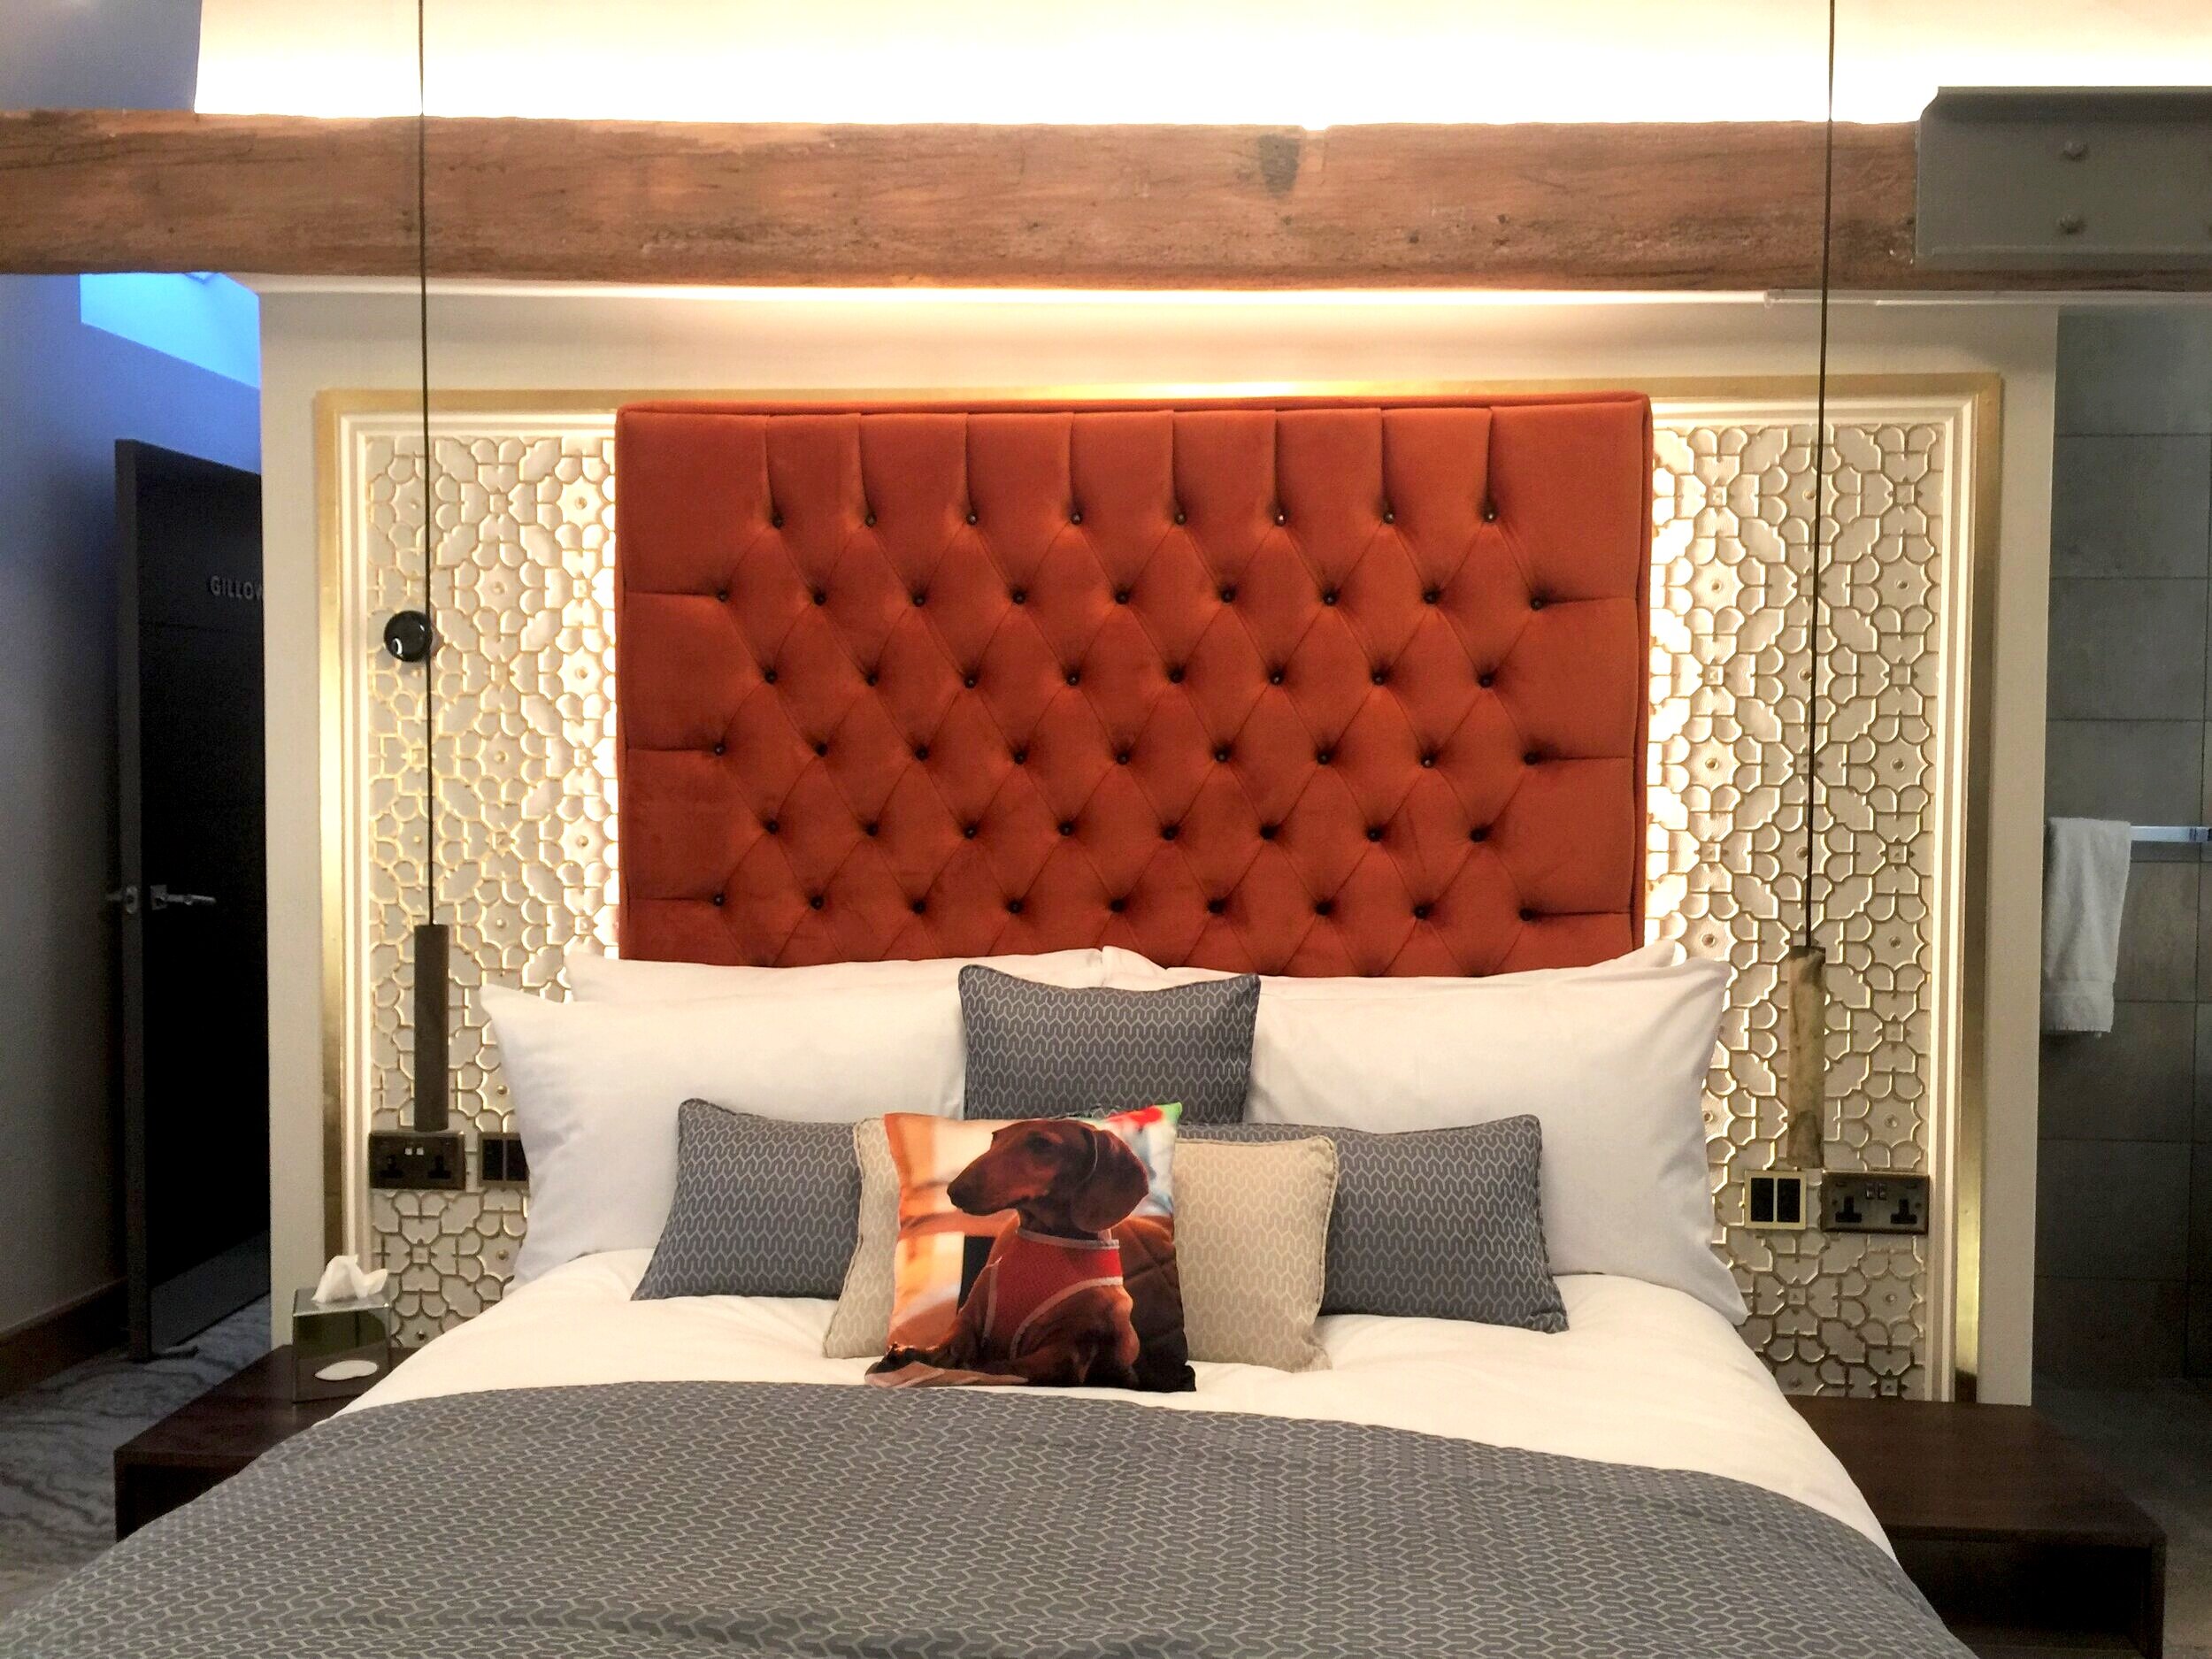 Bespoke Lincrusta Feature Headboard  with Gilded Gold Highlights by Frank Holmes Ltd, Lancashire